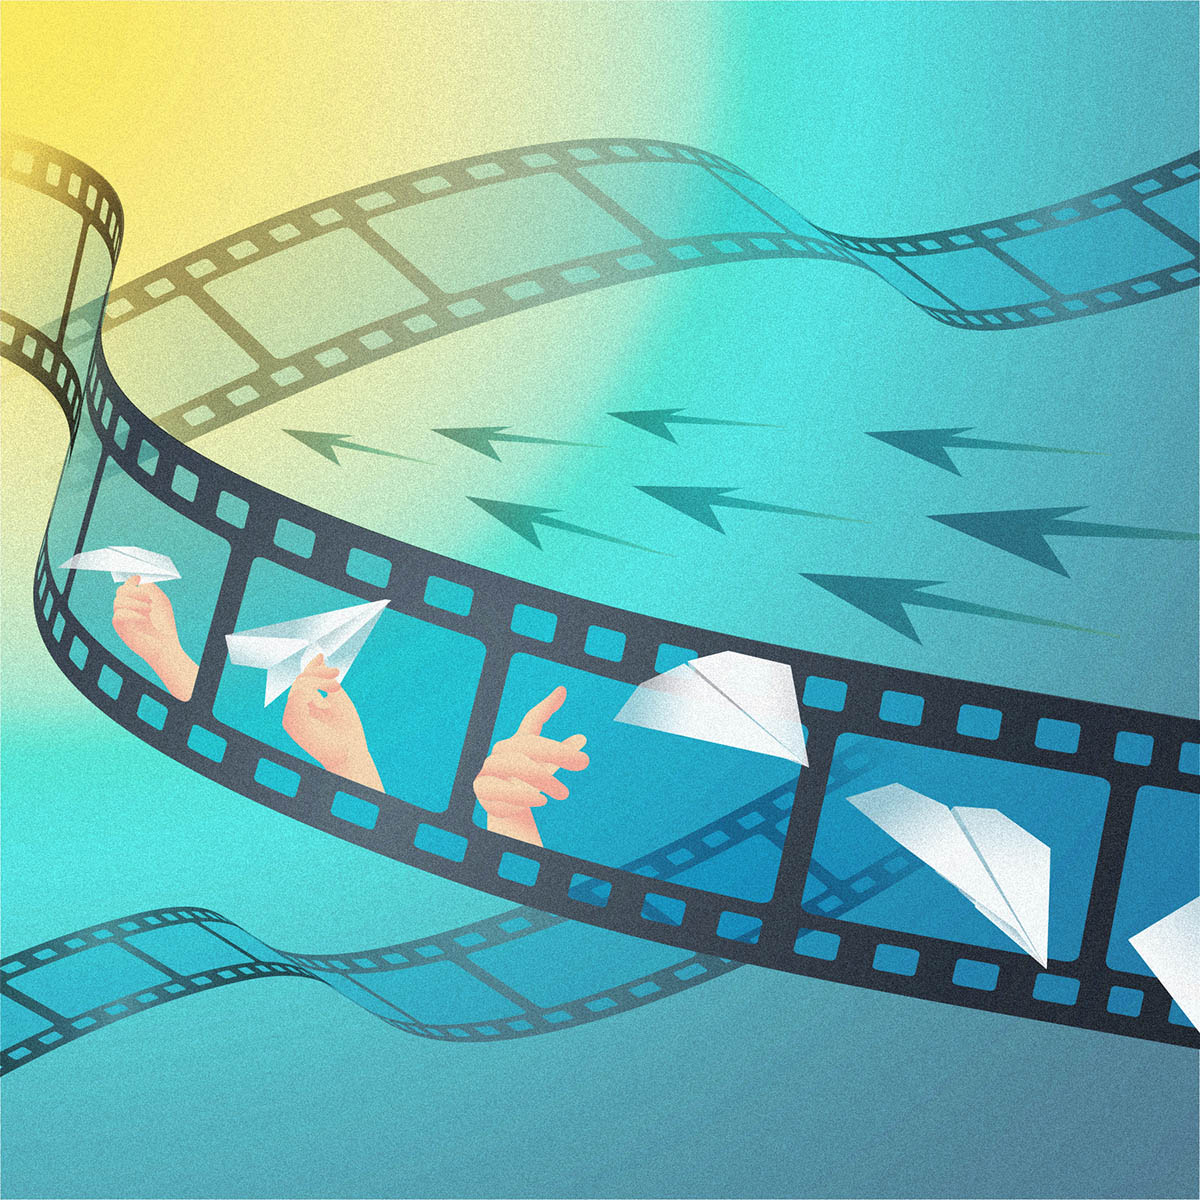 Artist's illustration of a film reel showing a paper plane being thrown, with arrows to suggest reverse play.